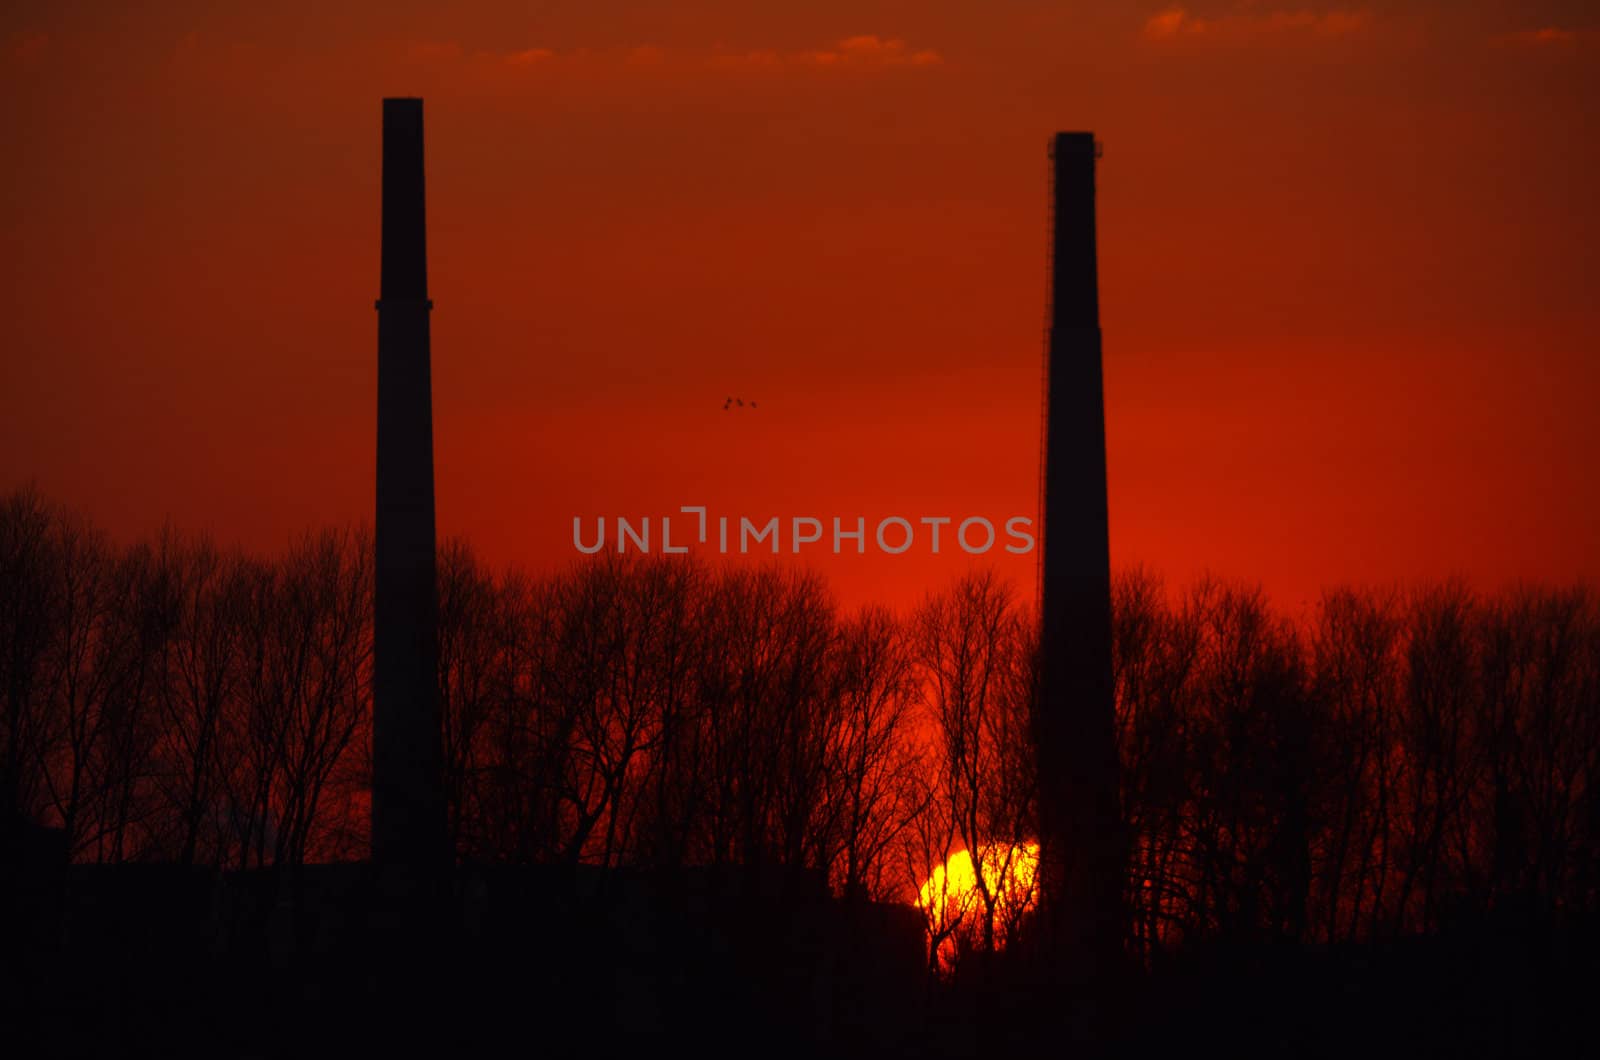 Silhuette of two chimneys in front of a red sunset.